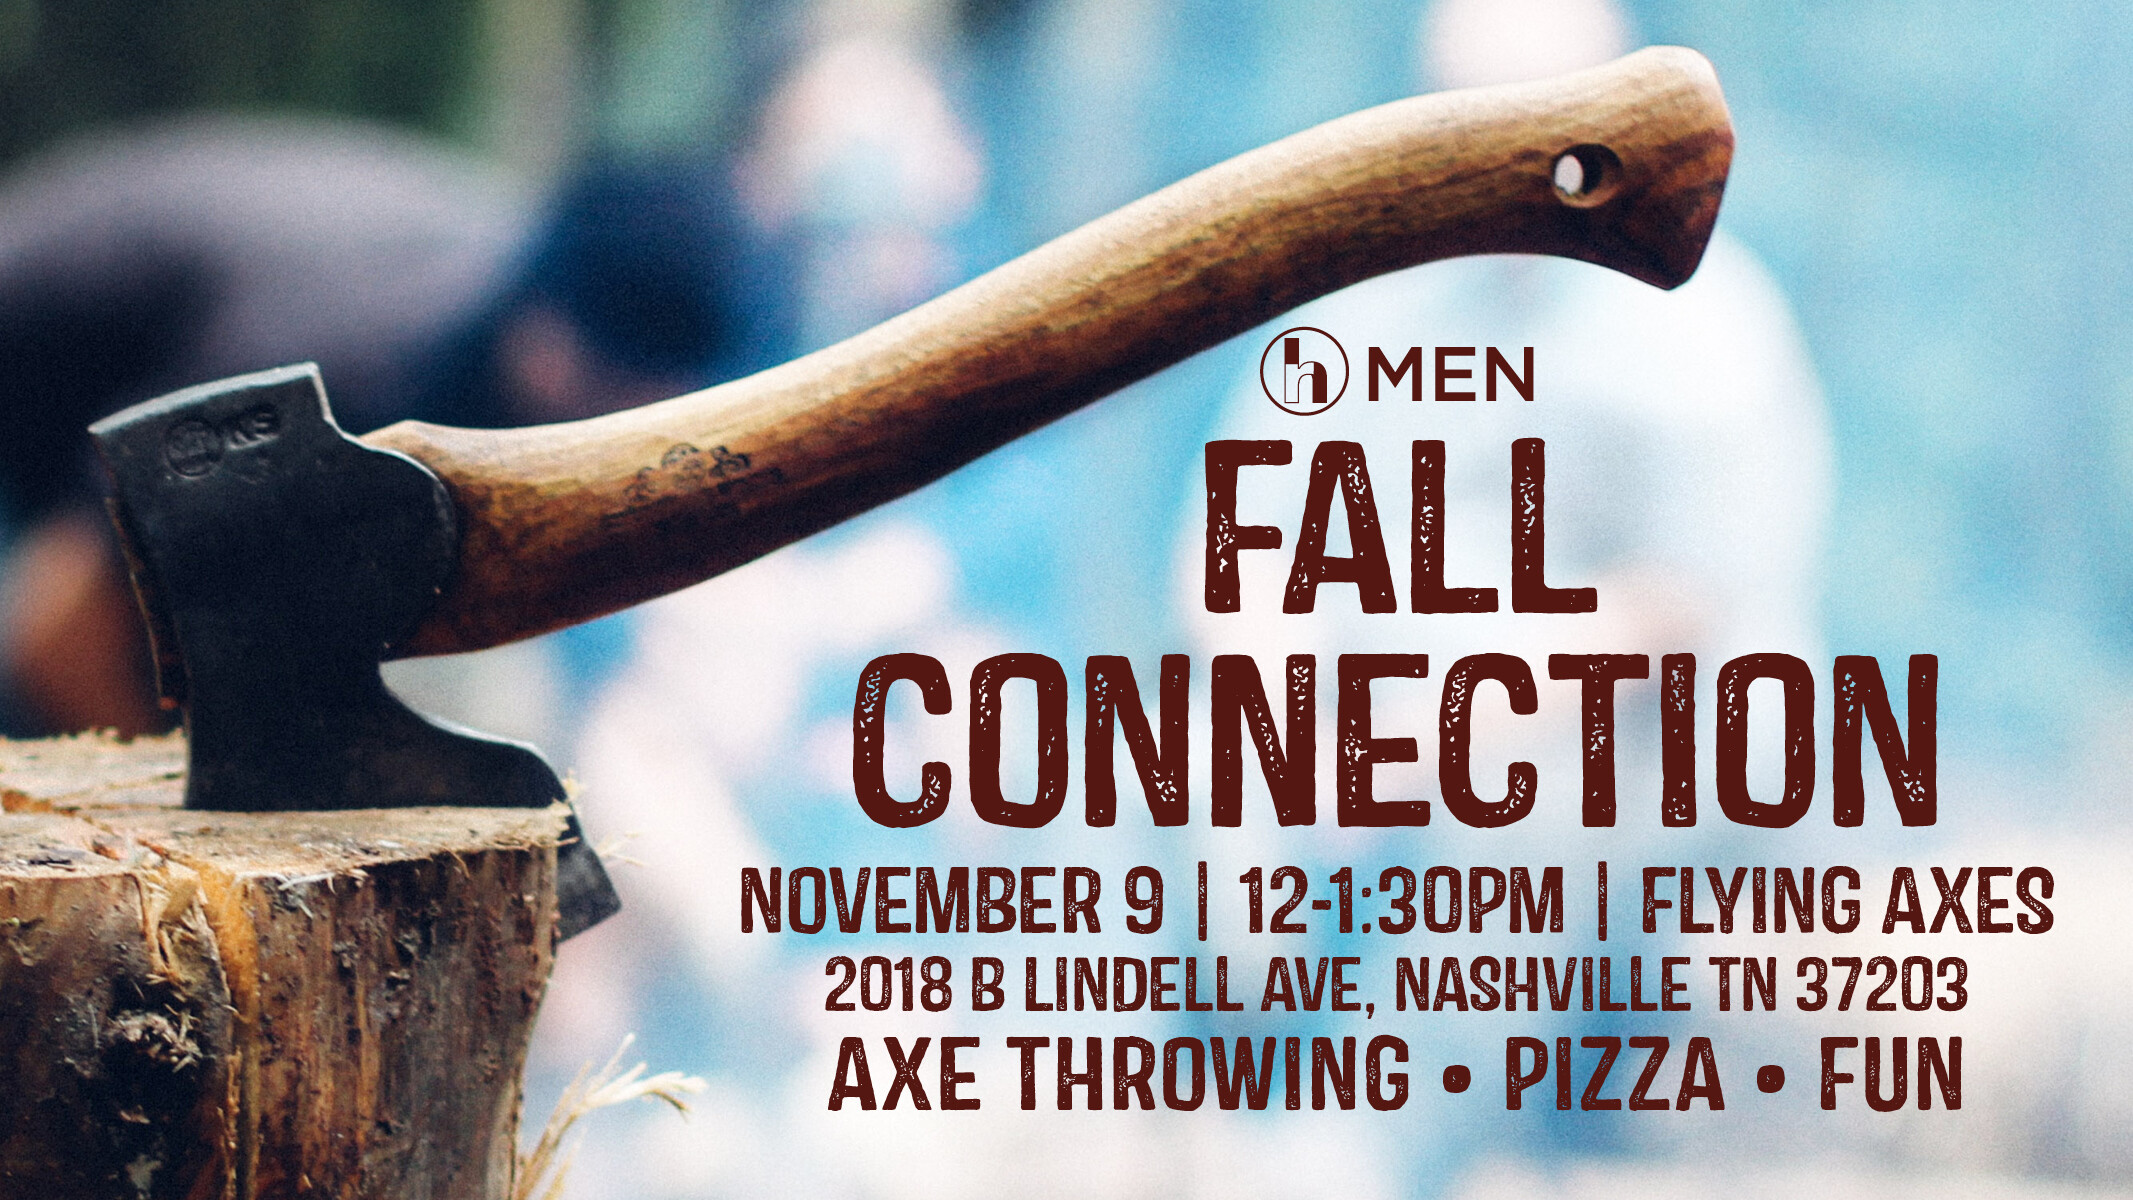 Men's Fall Connection